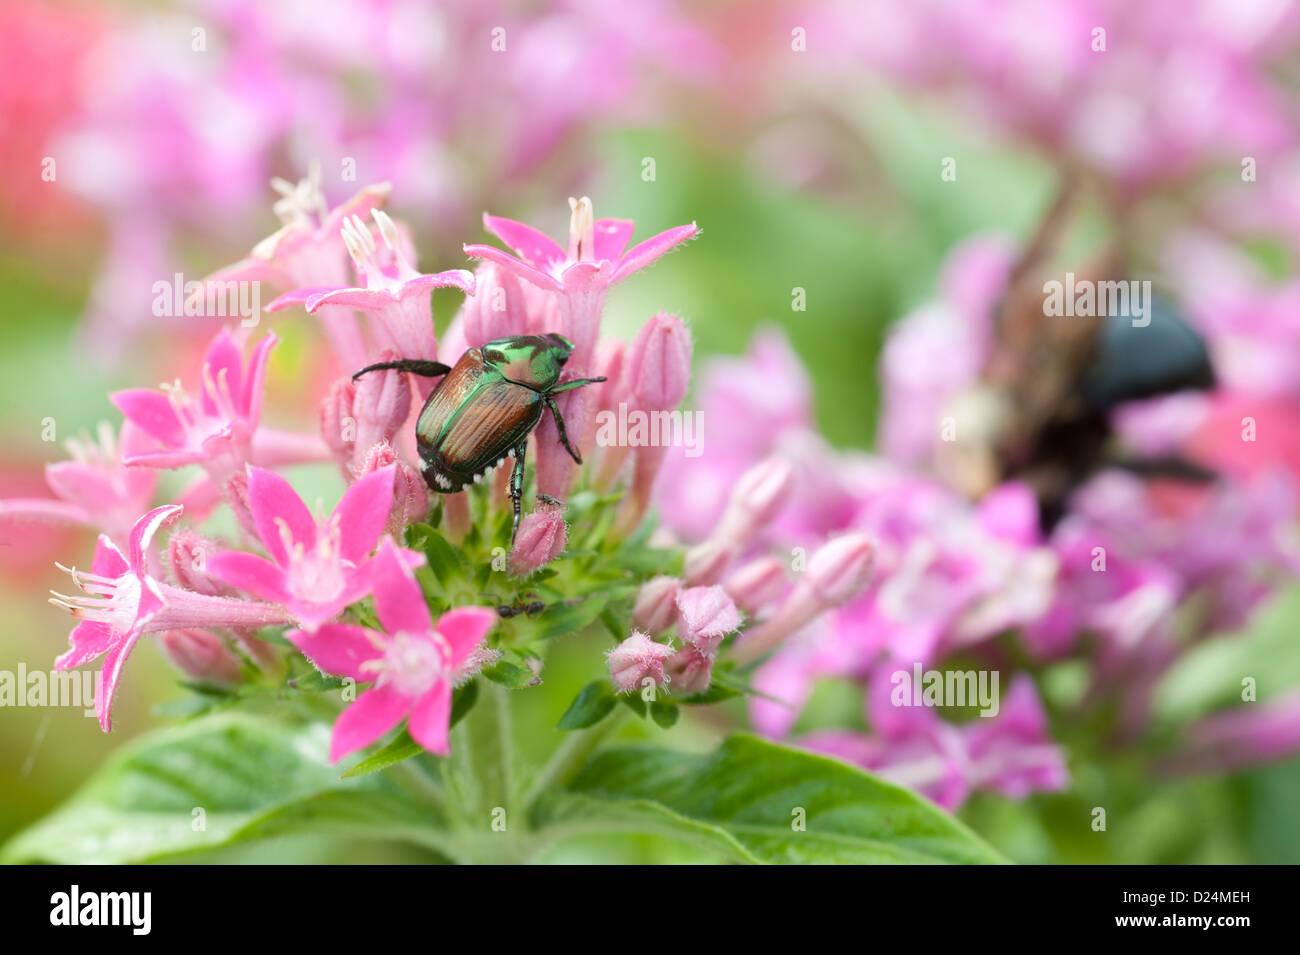 Bumble bee and June Bug getting pollen from a pink blossoming flower growing on a cut flower farm Stock Photo